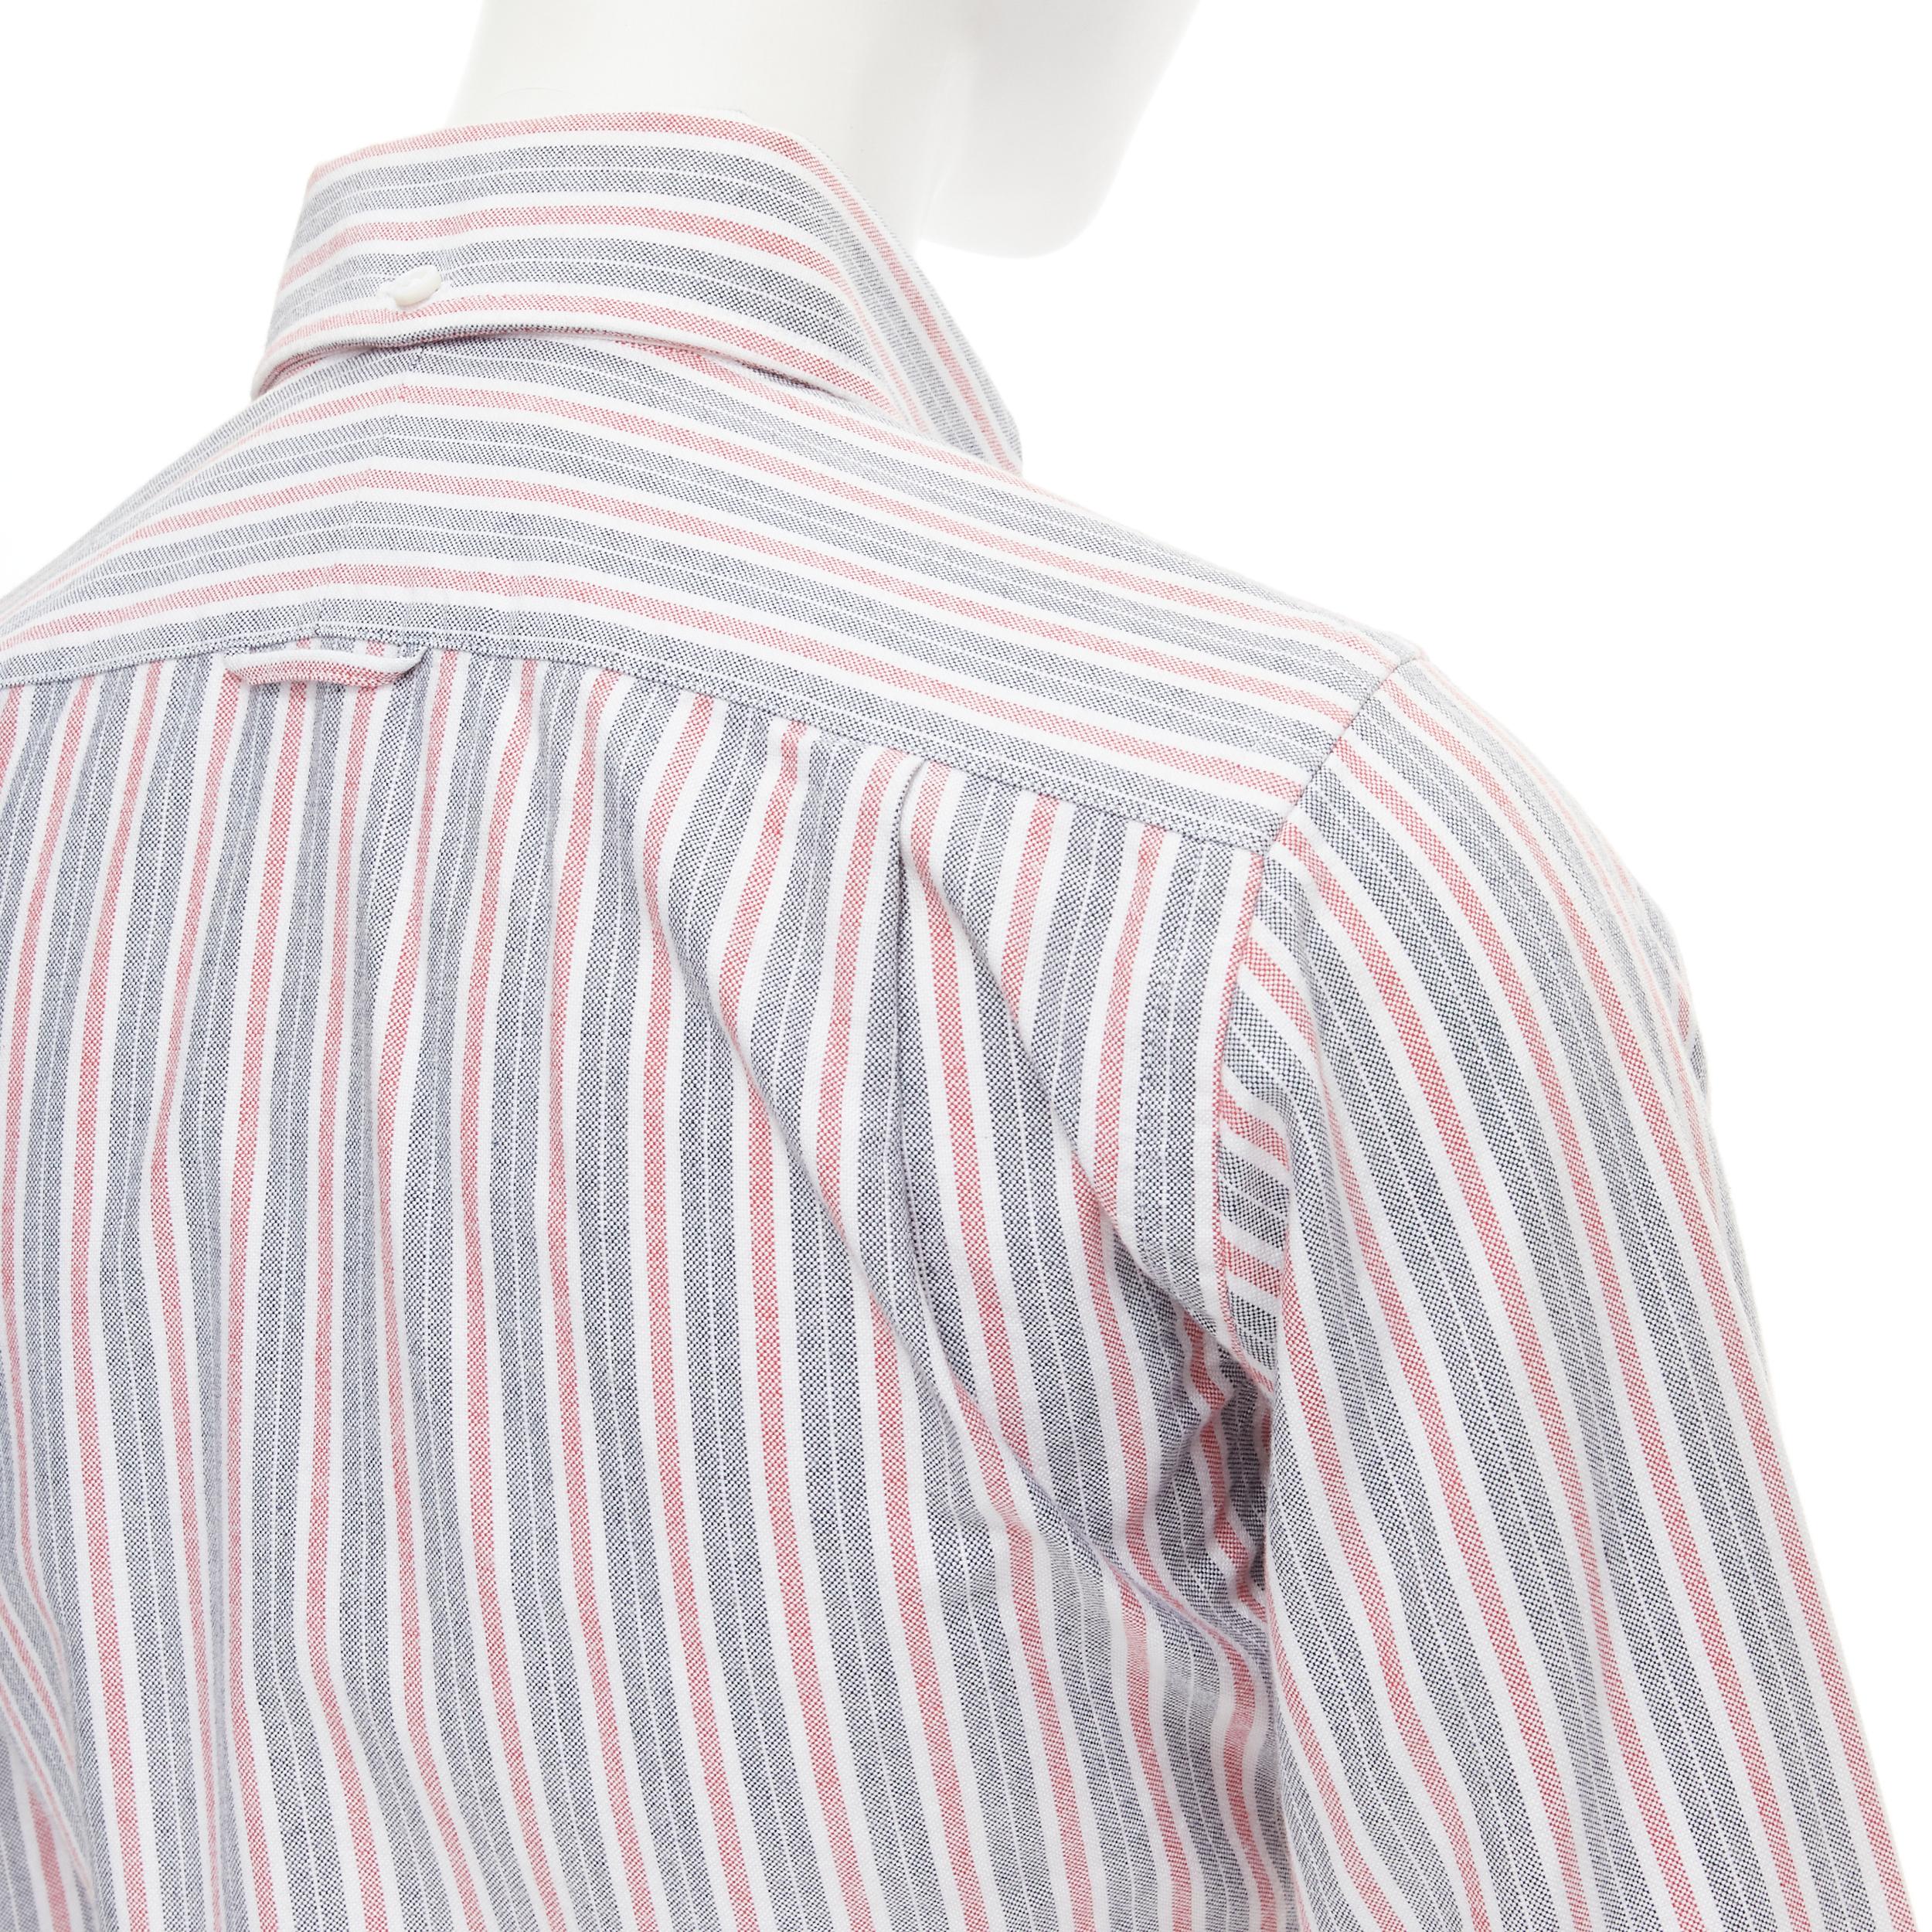 THOM BROWNE 2009 Signature grey red stripe cotton slim fit shirt US0 For Sale 1